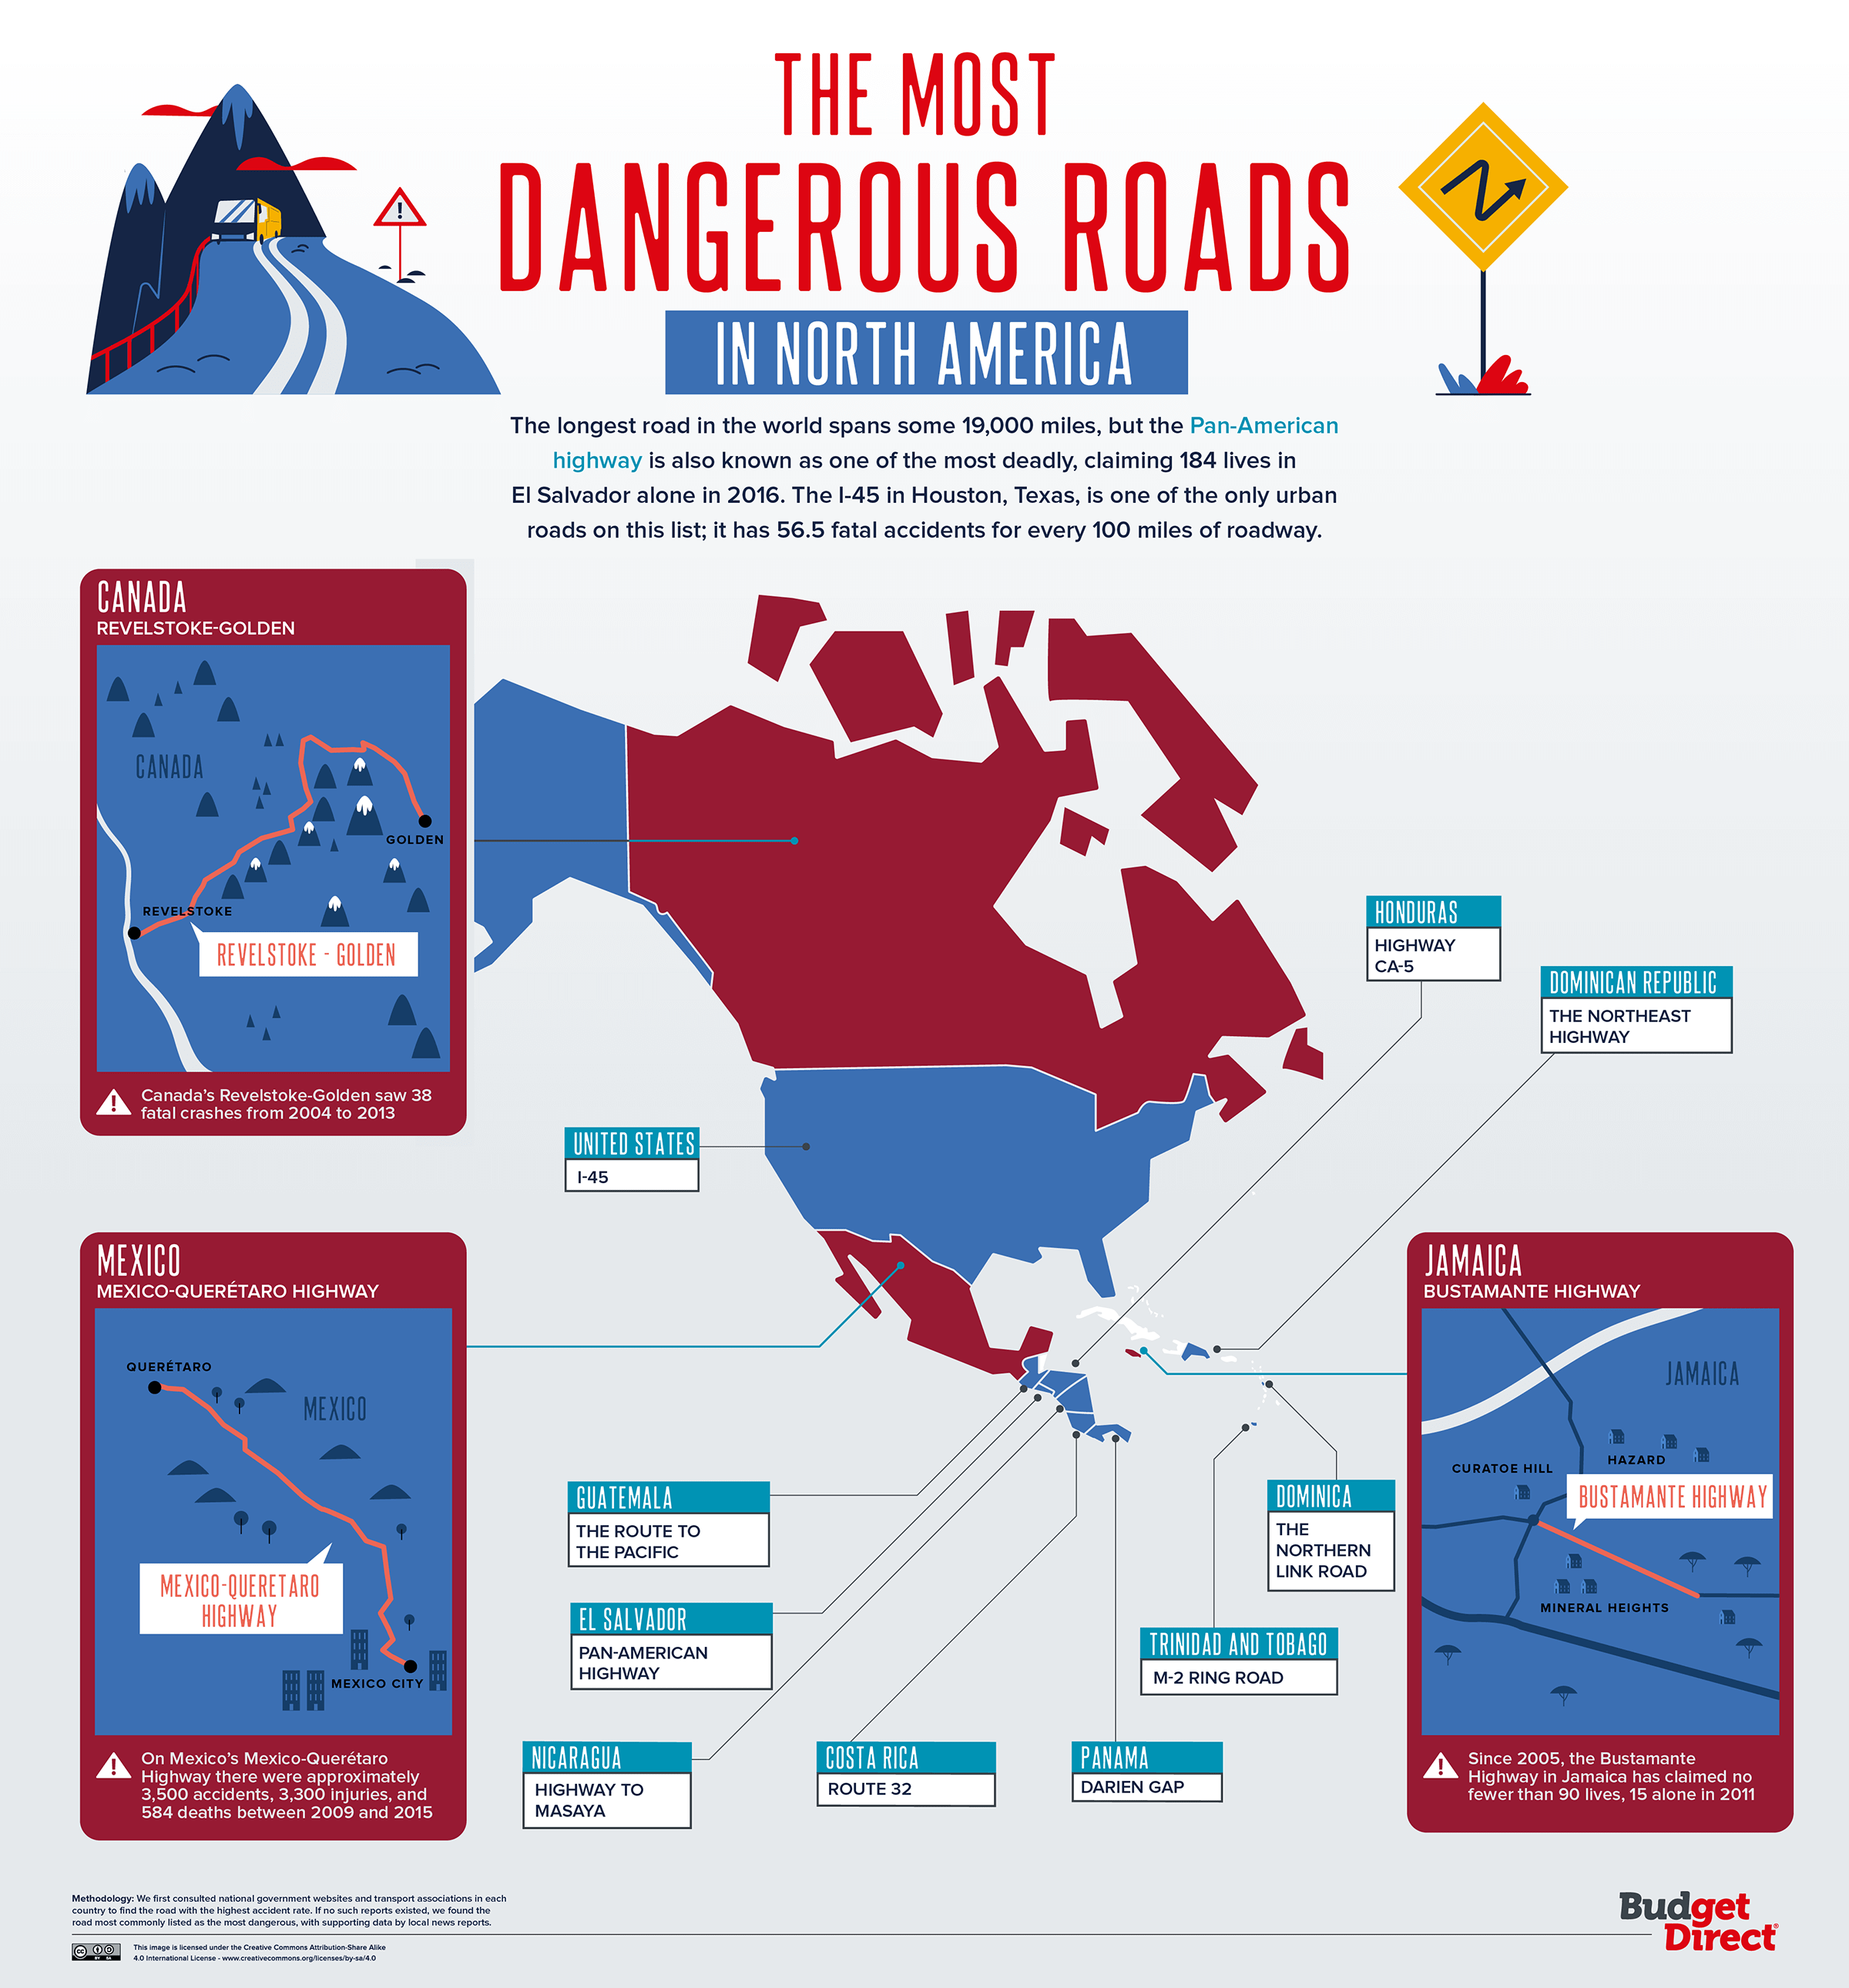 The most dangerous roads in North America